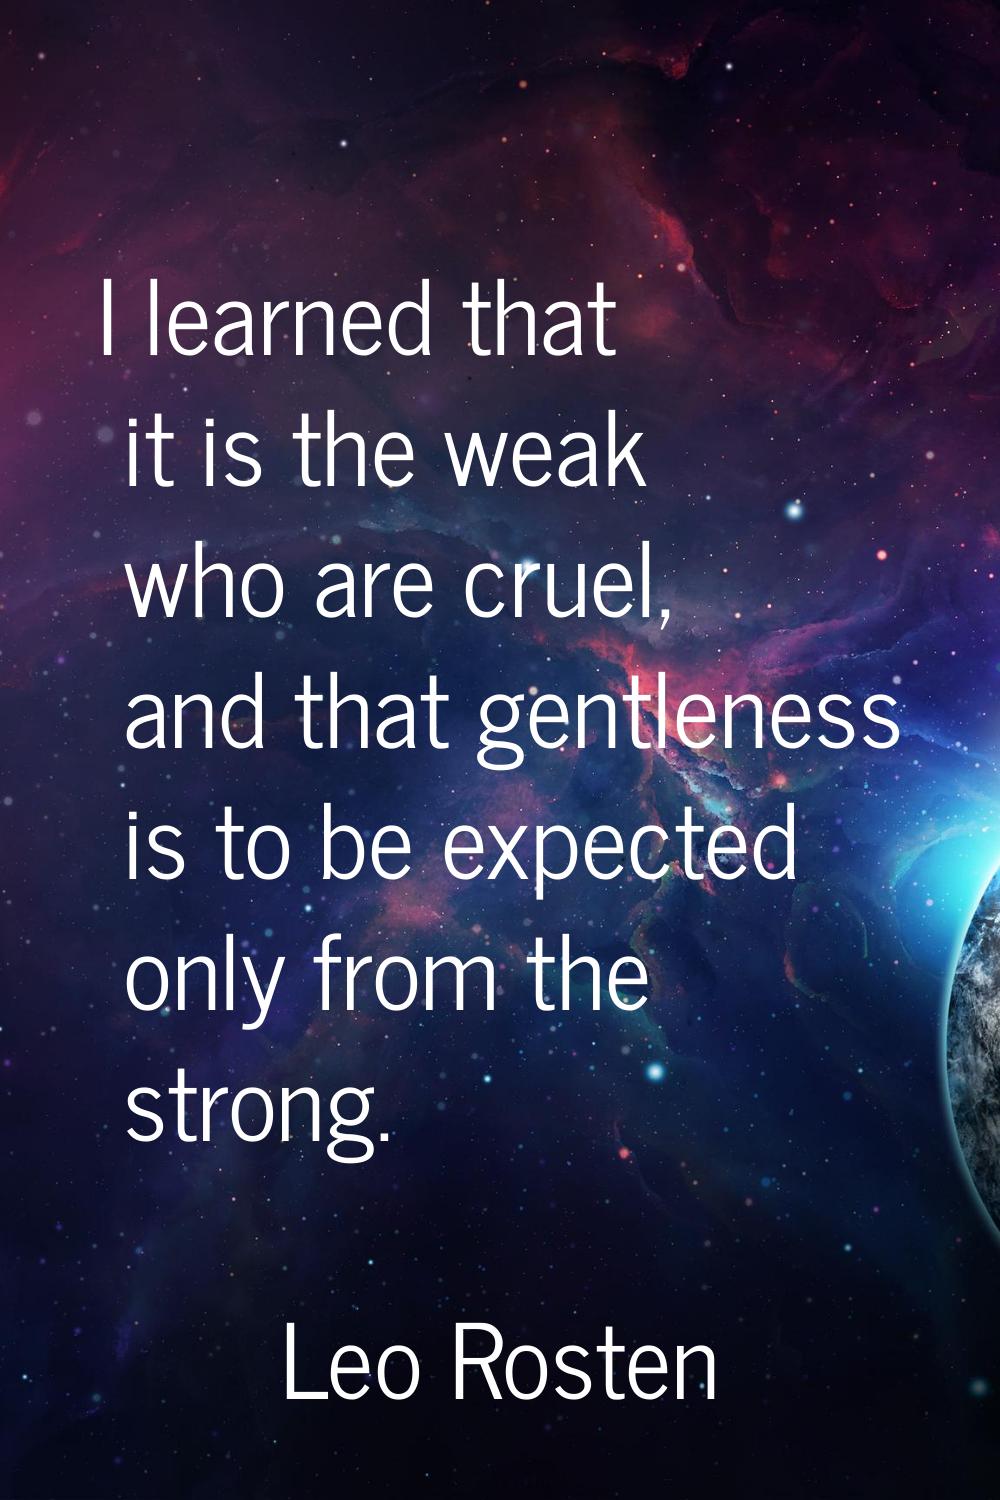 I learned that it is the weak who are cruel, and that gentleness is to be expected only from the st